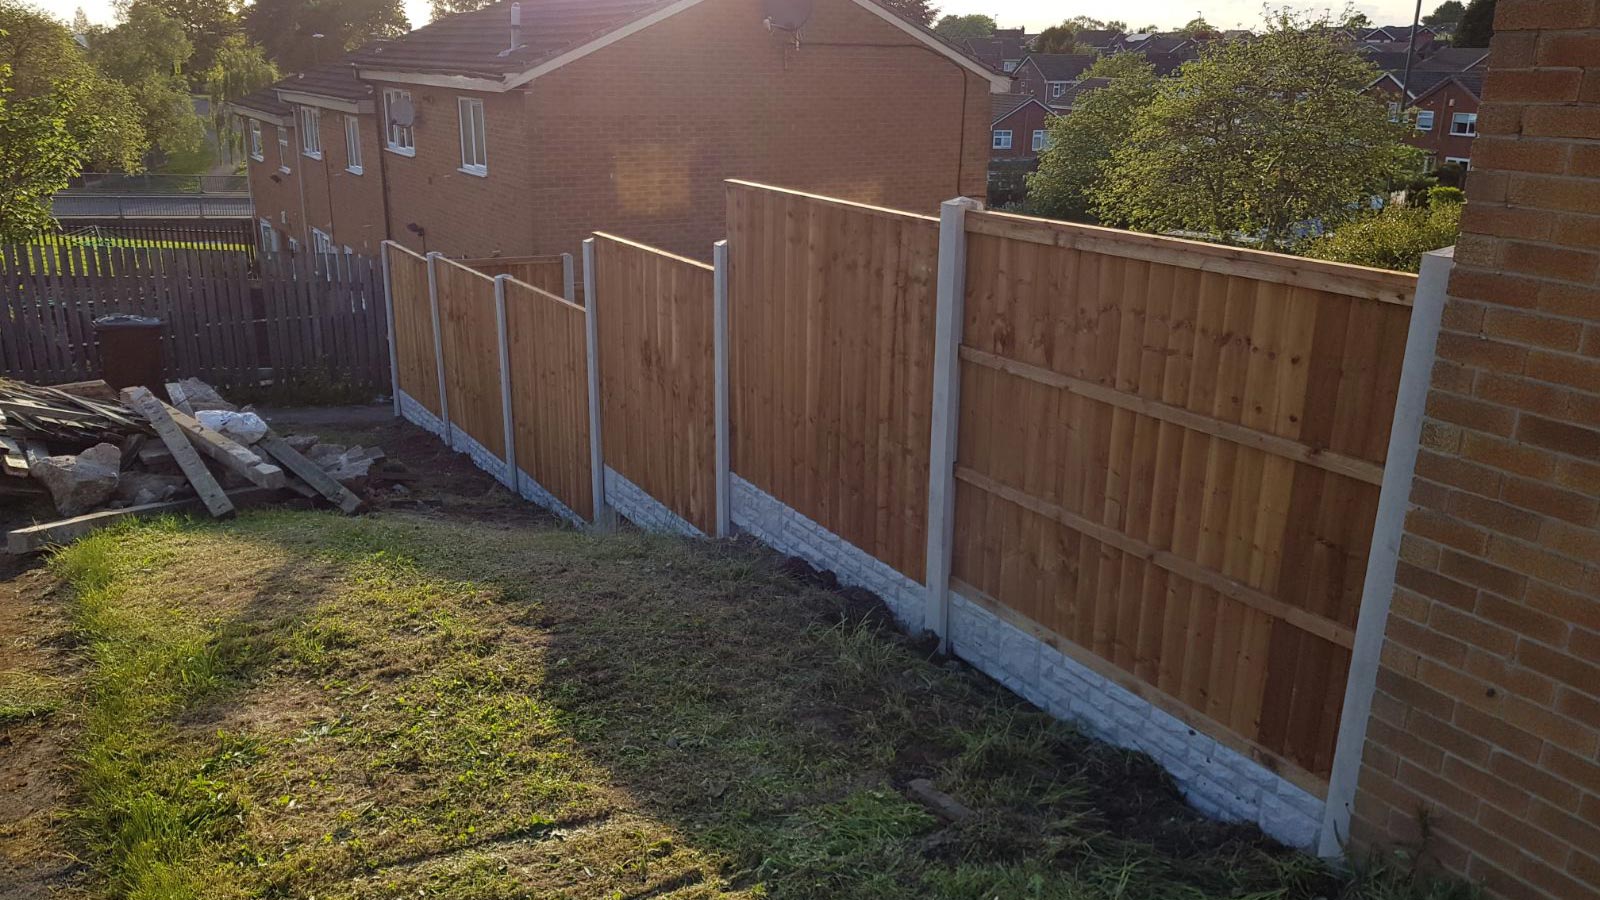 A fence that our team worked on erecting in Barnsley